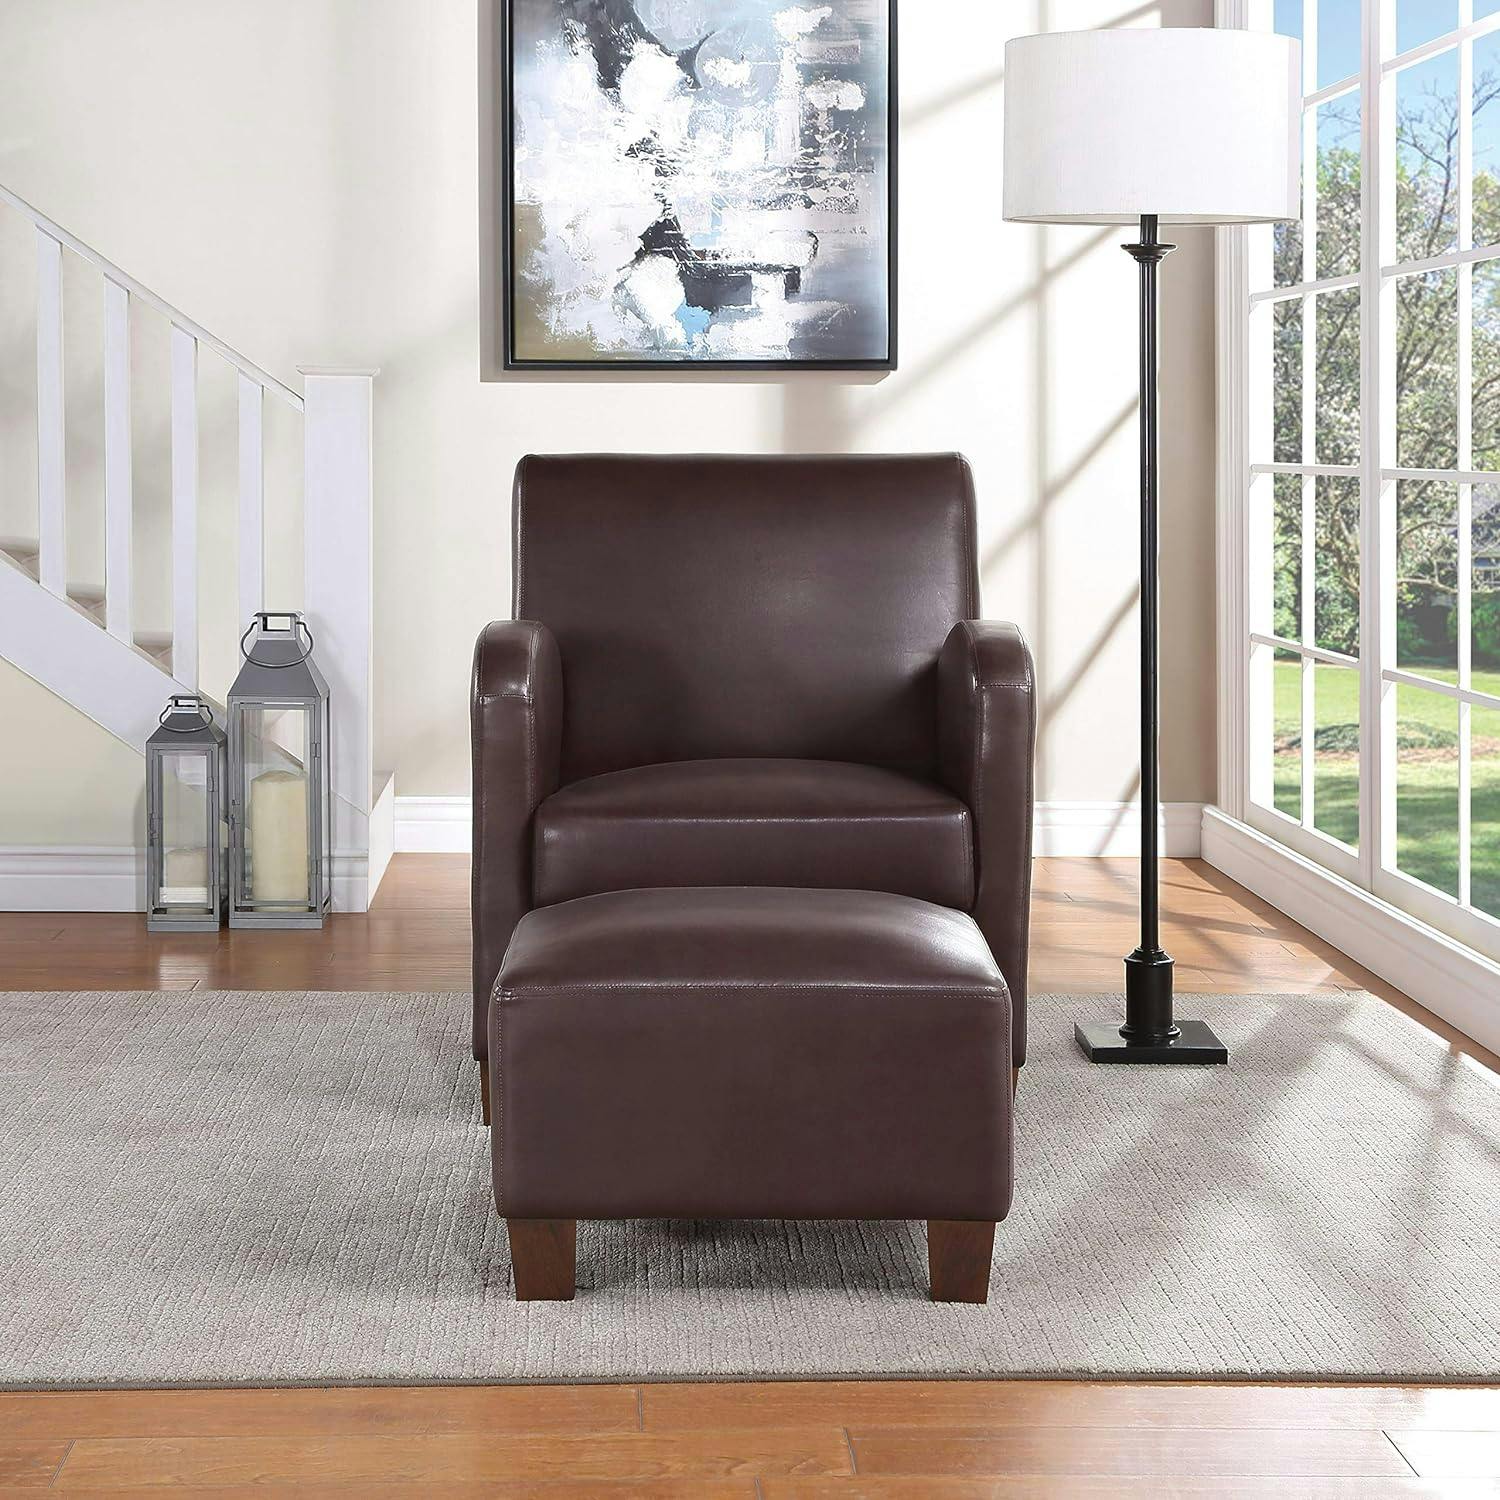 Cocoa Brown Faux Leather Club Chair & Ottoman